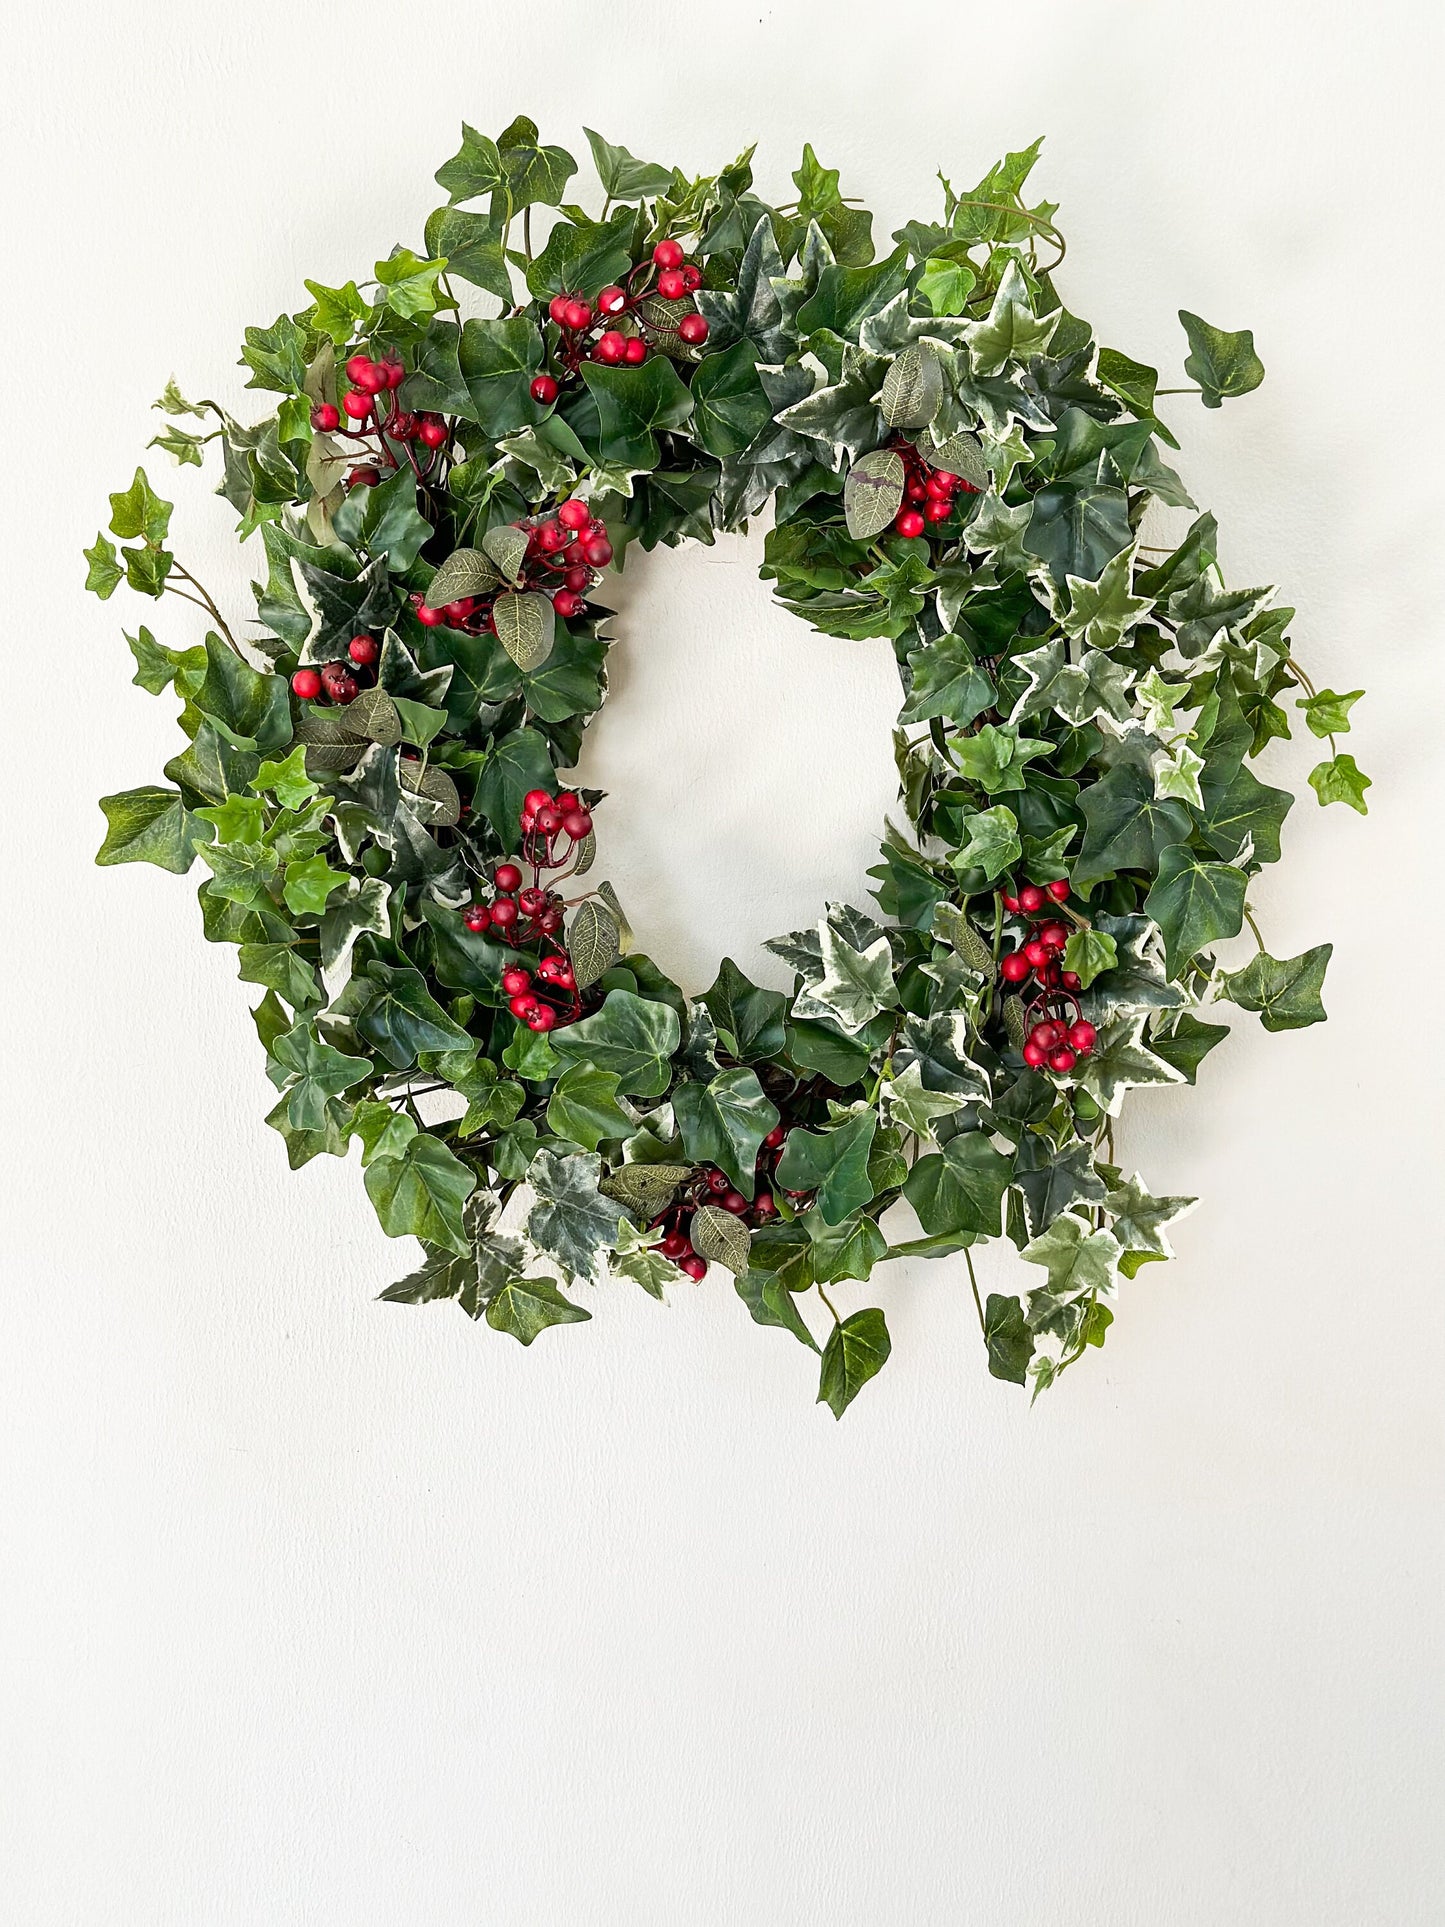 Classic Christmas Wreath w/ Ivy and Red Berries, Vintage Style Wreath for Front Door, Unique Seasonal Home Decor, Simple Holiday Wreath